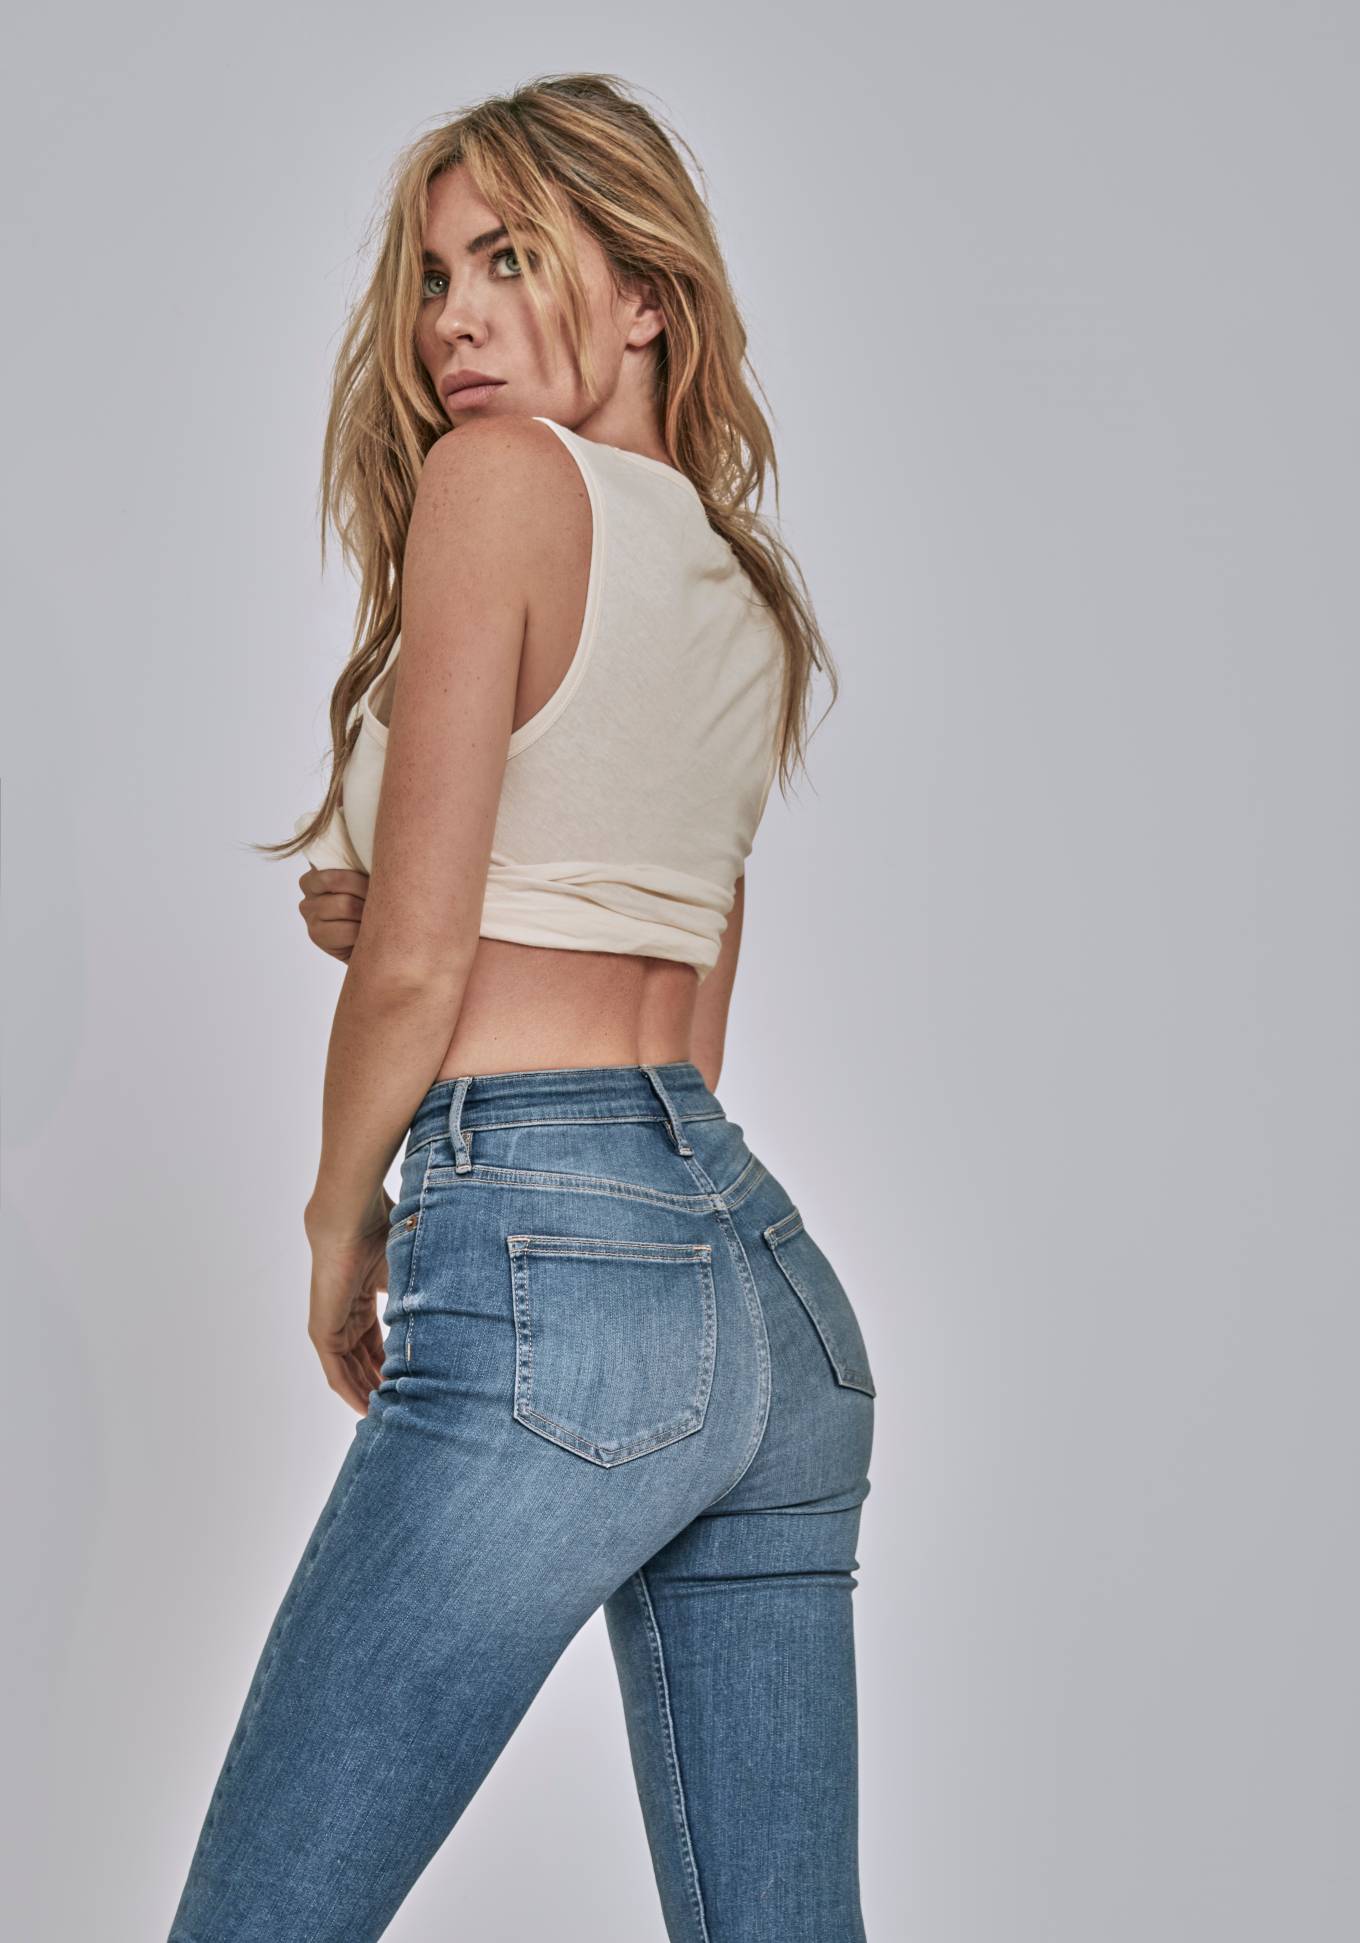 Abbey Clancy - Fandi Clothing Collection Photo shoot (October 2021)